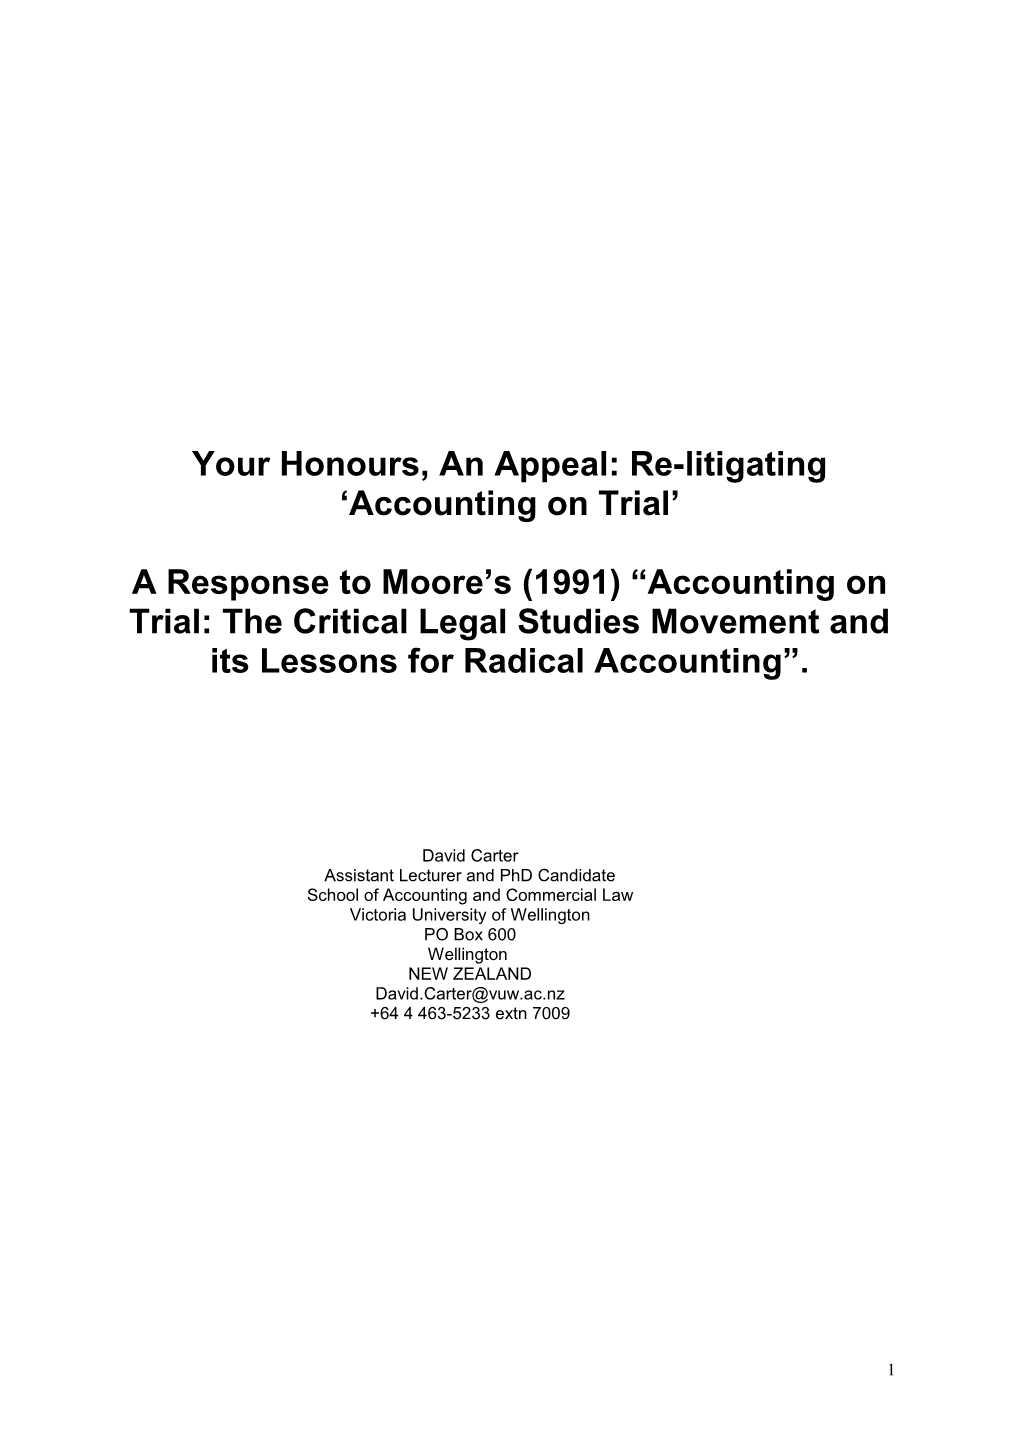 Your Honour, an Appeal: Re-Litigating Accounting on Trial